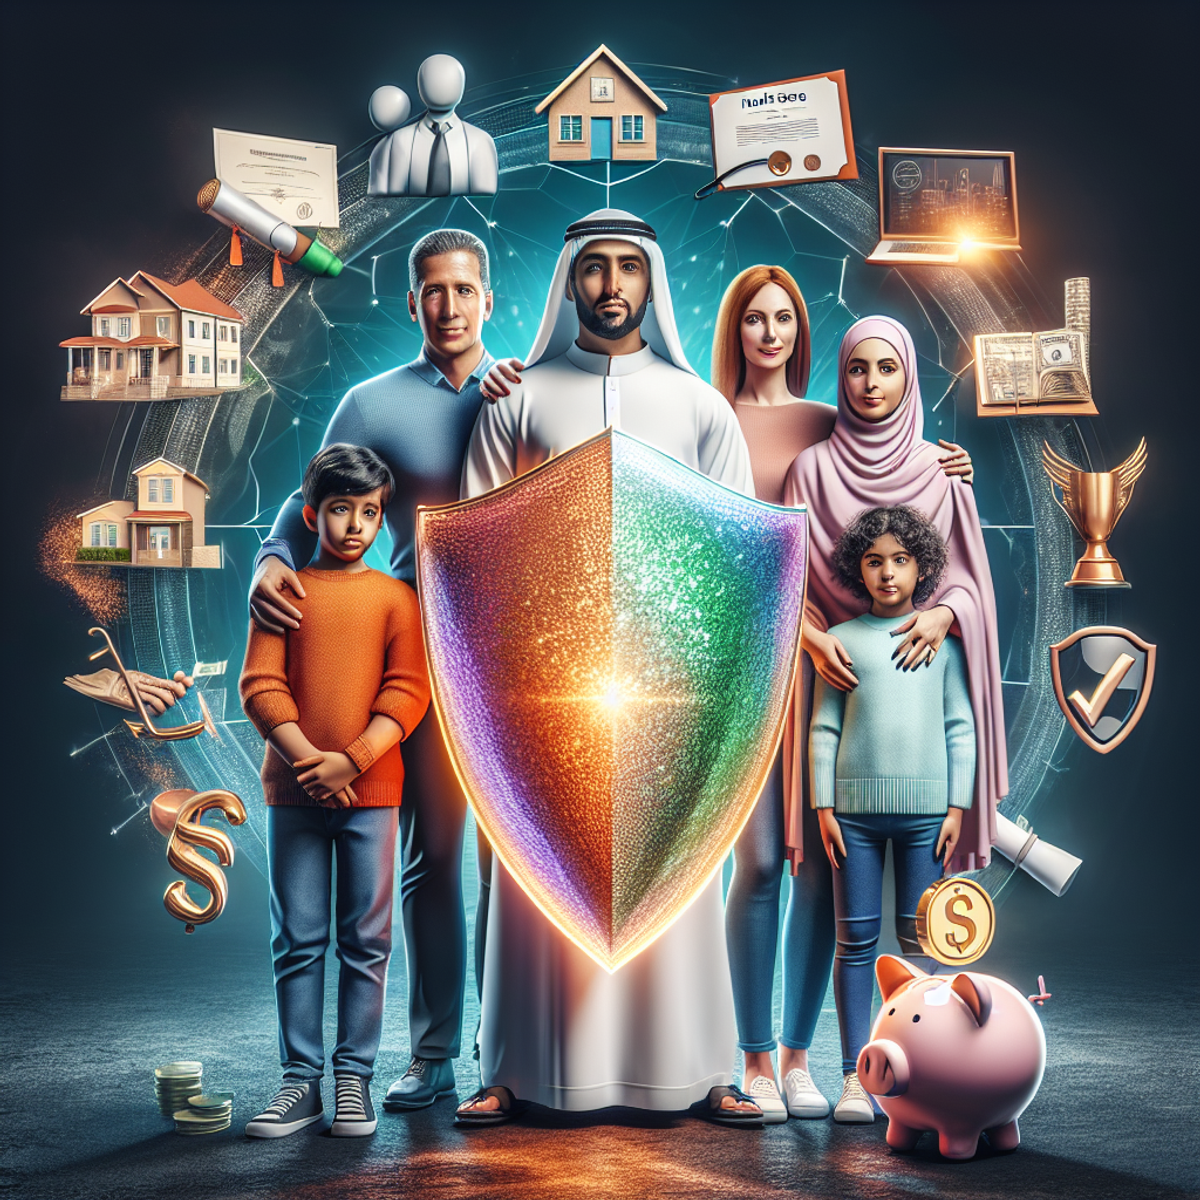 A diverse family huddled together under a radiant, translucent shield, surrounded by symbols of financial security and prosperity.